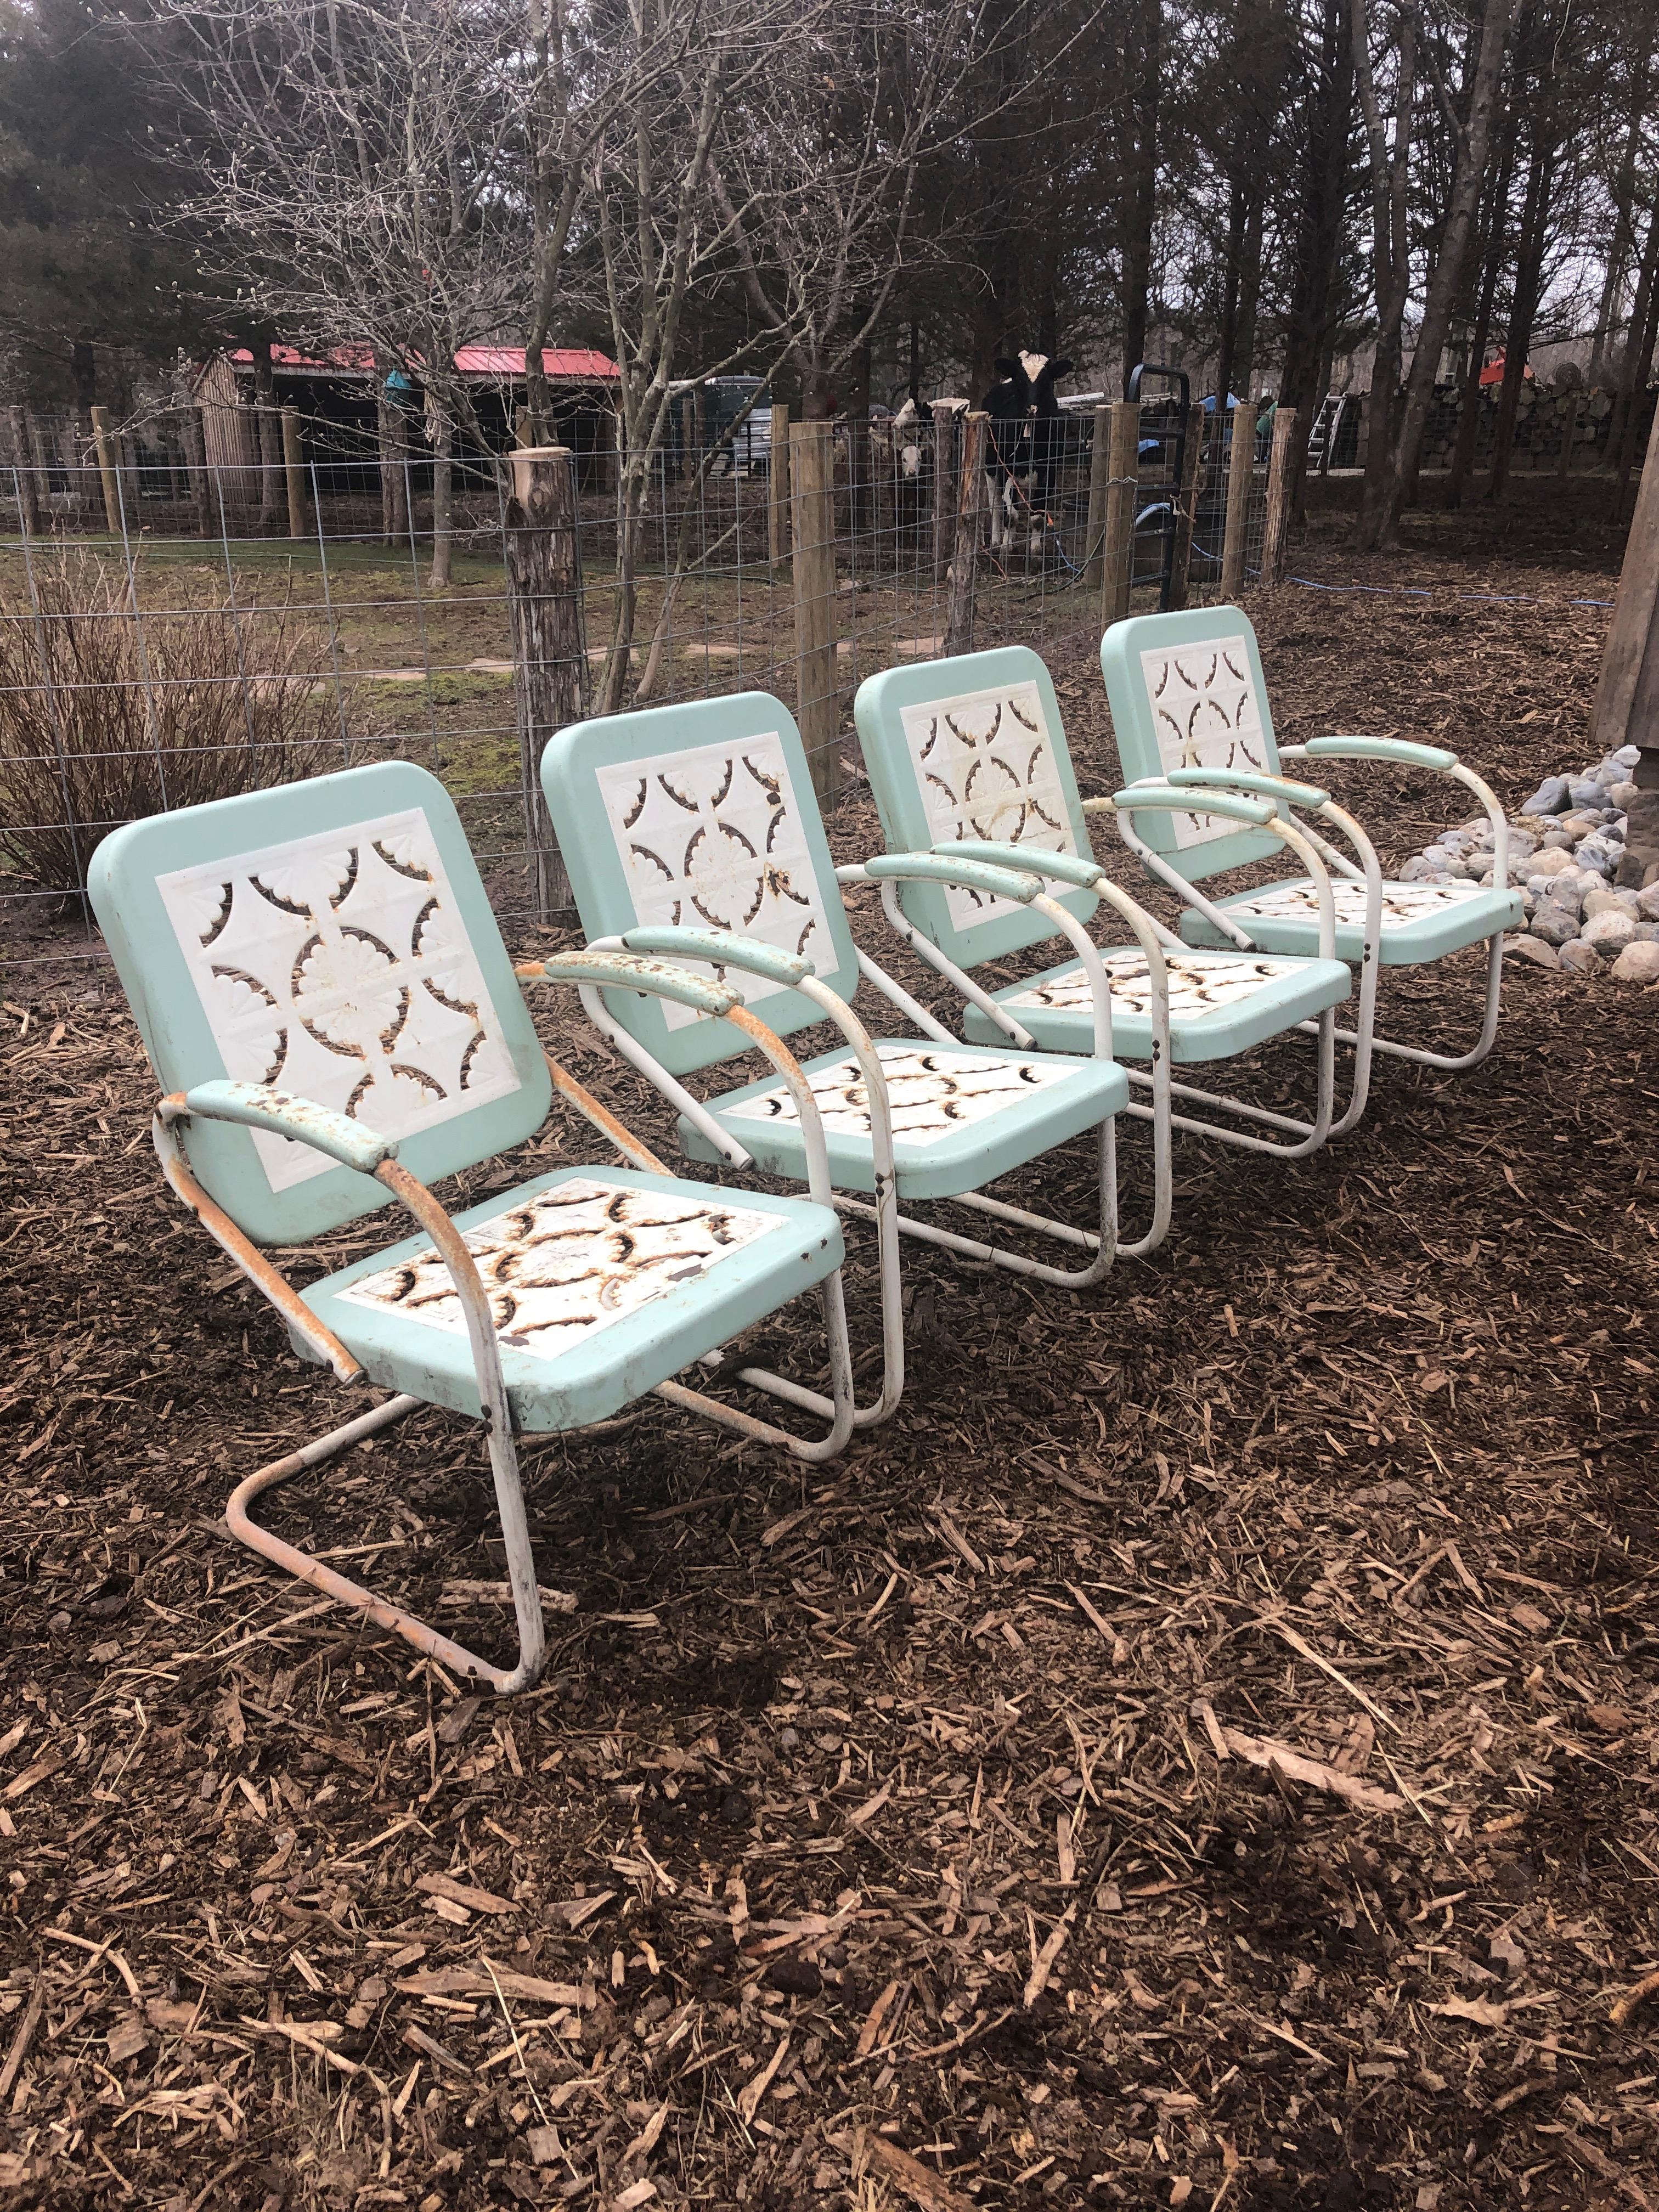 An inviting set of four classic country metal garden arm chairs having cut out charming patterns on the seats and backs. The color is white with light turquoise.
Measures: Arm height 24.5.